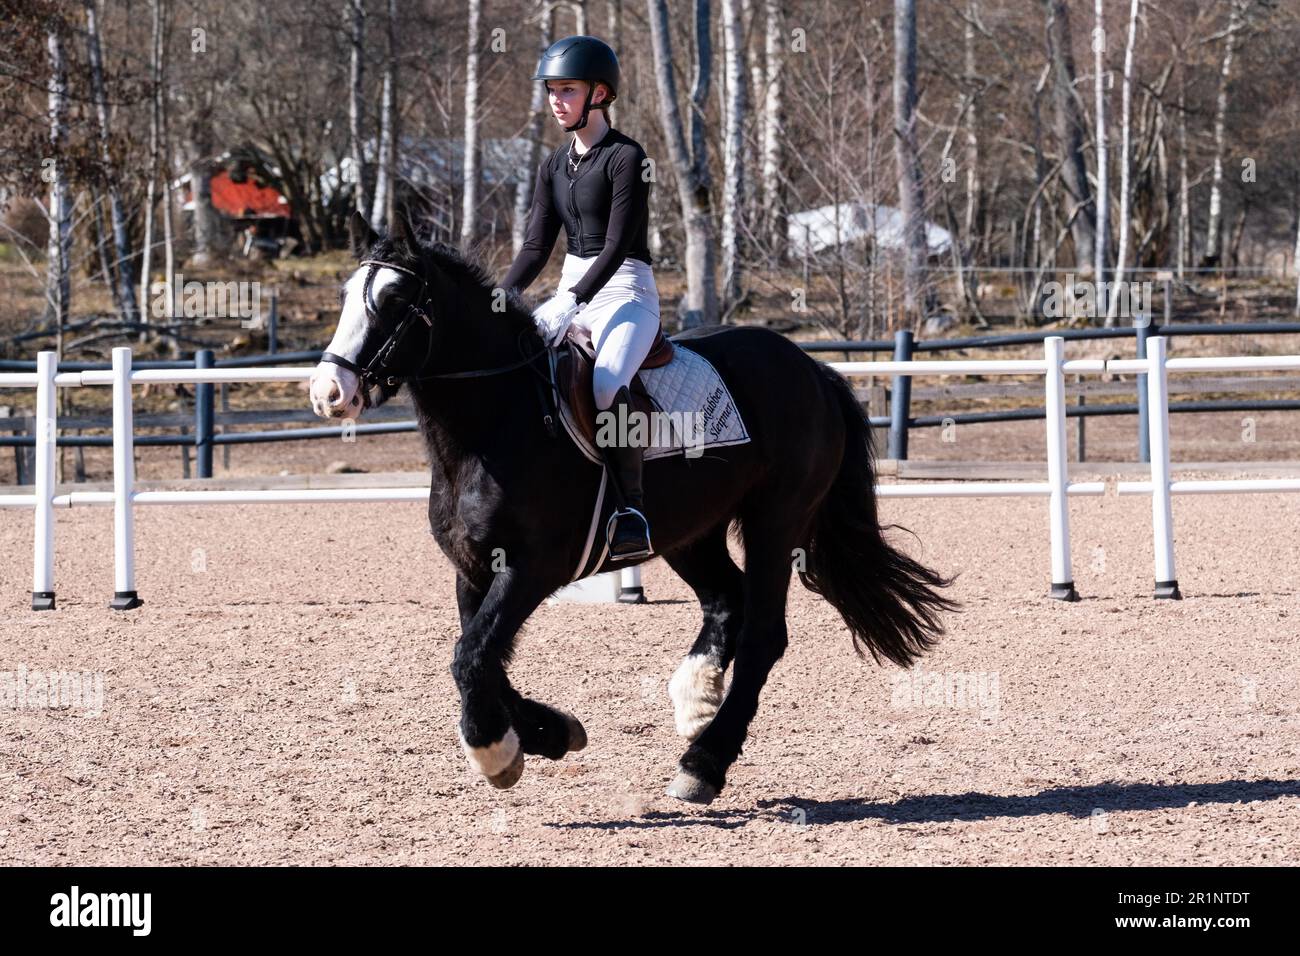 DRESSAGE, YOUTH, PONY: Youth Invitational Dressage Event on a pony in the Åland Islands, Finland. April 2023. Stock Photo